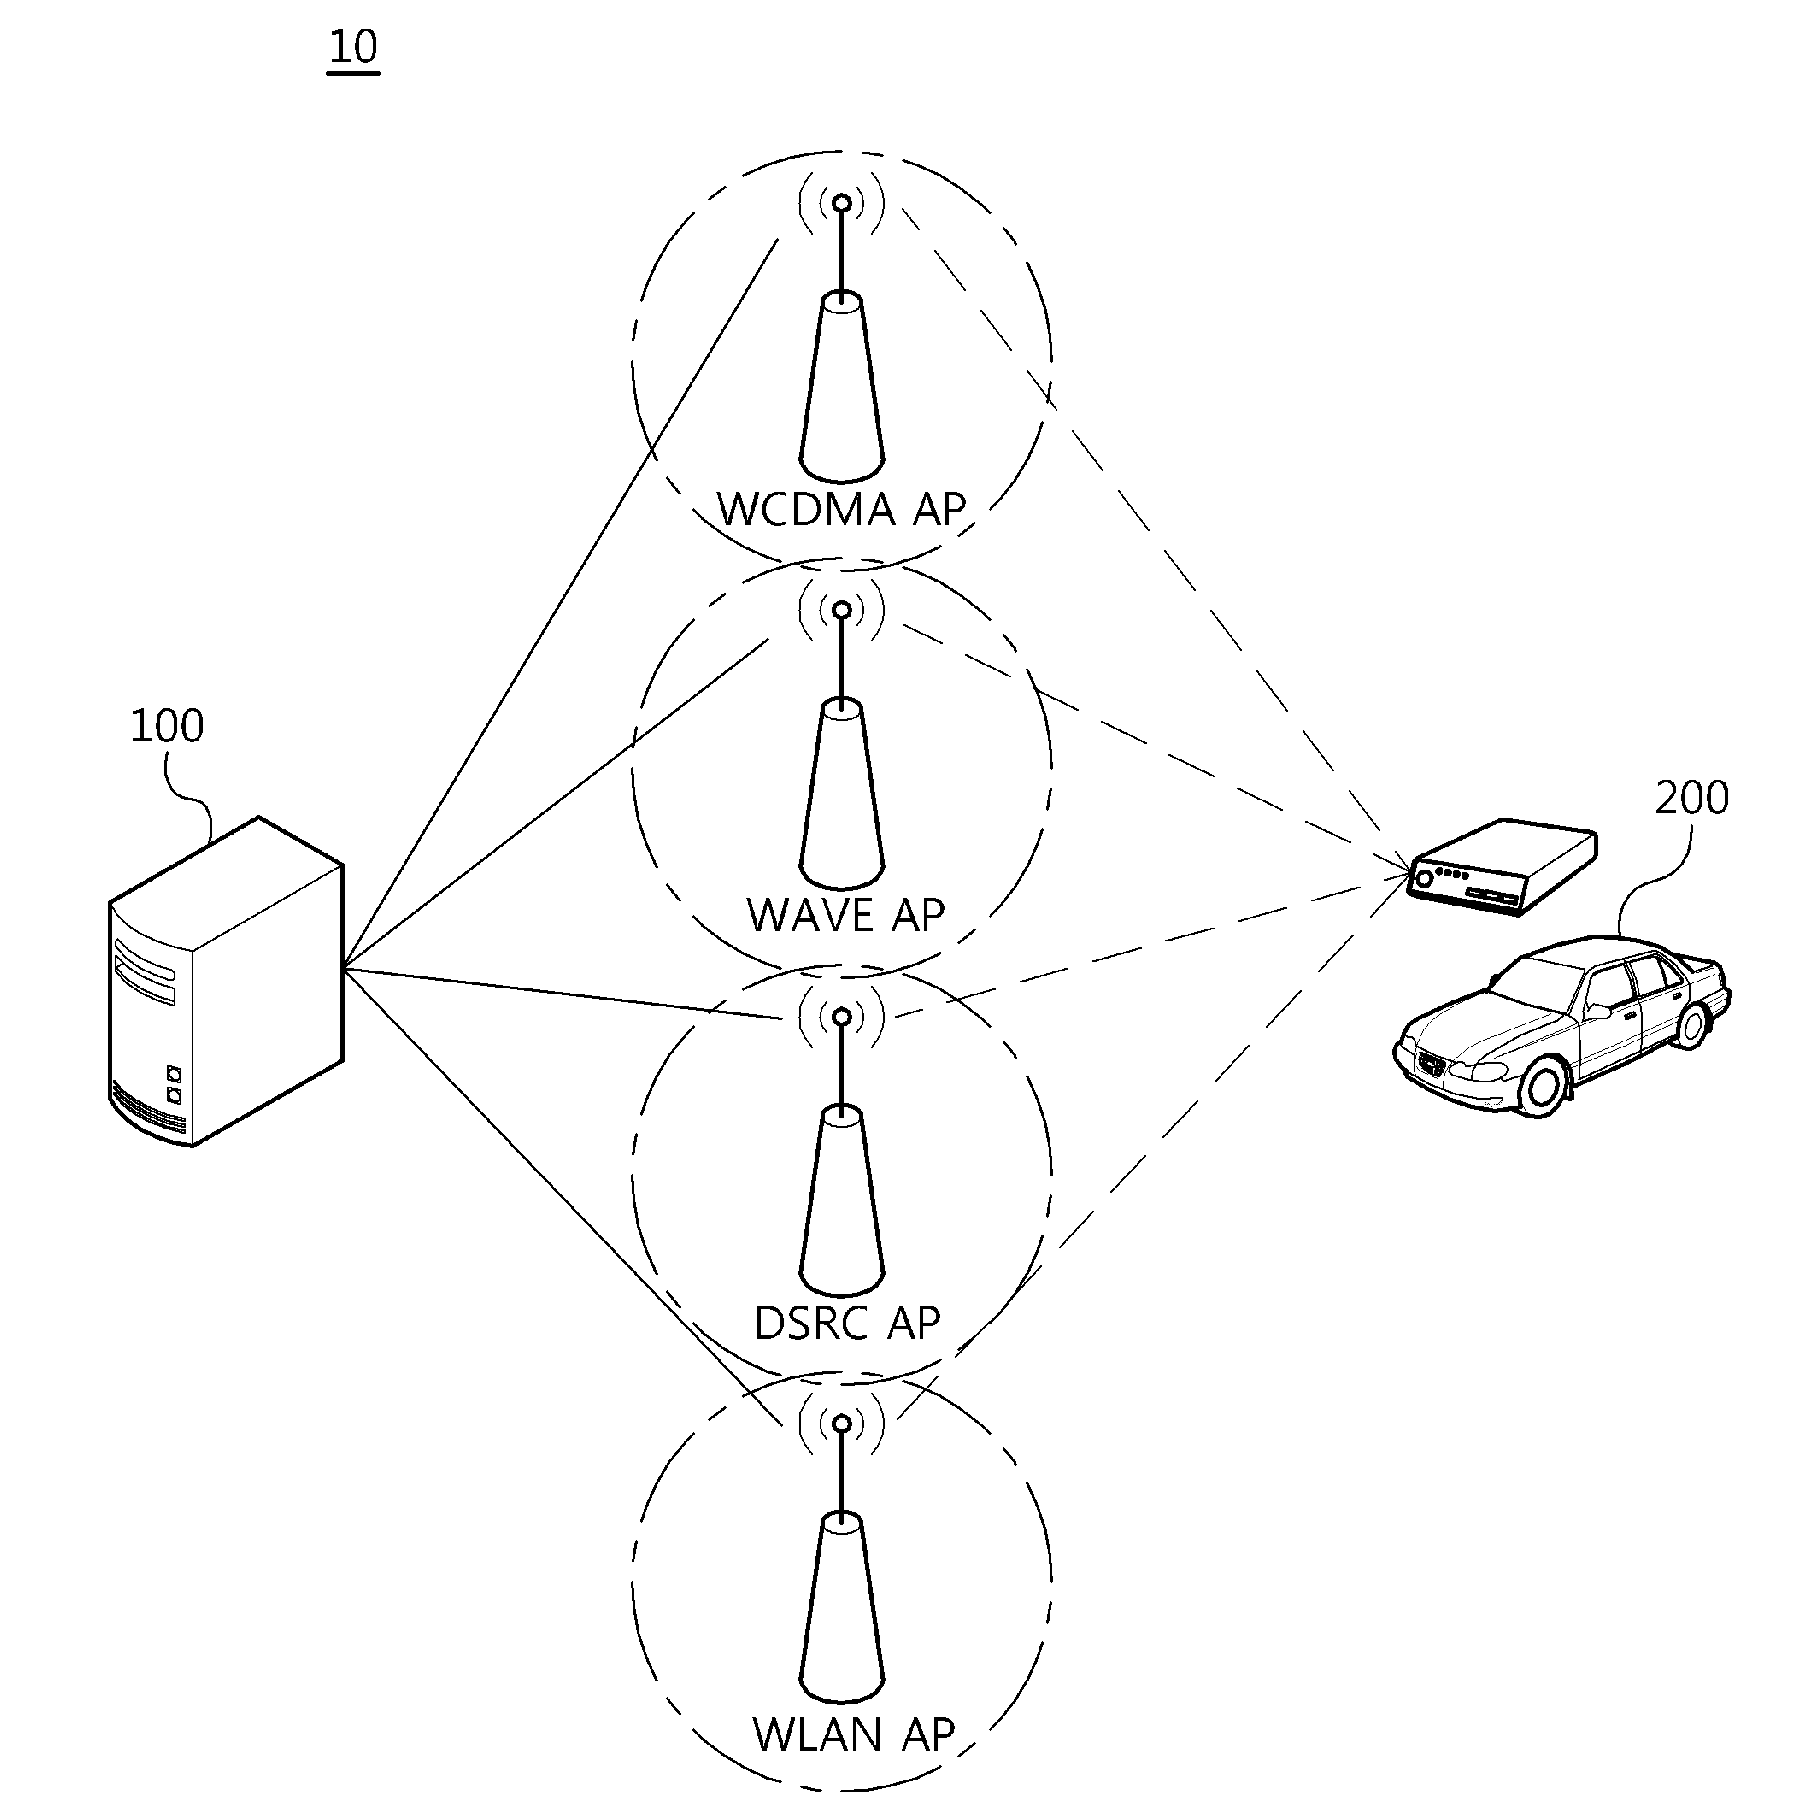 Apparatus and method for selecting communication network